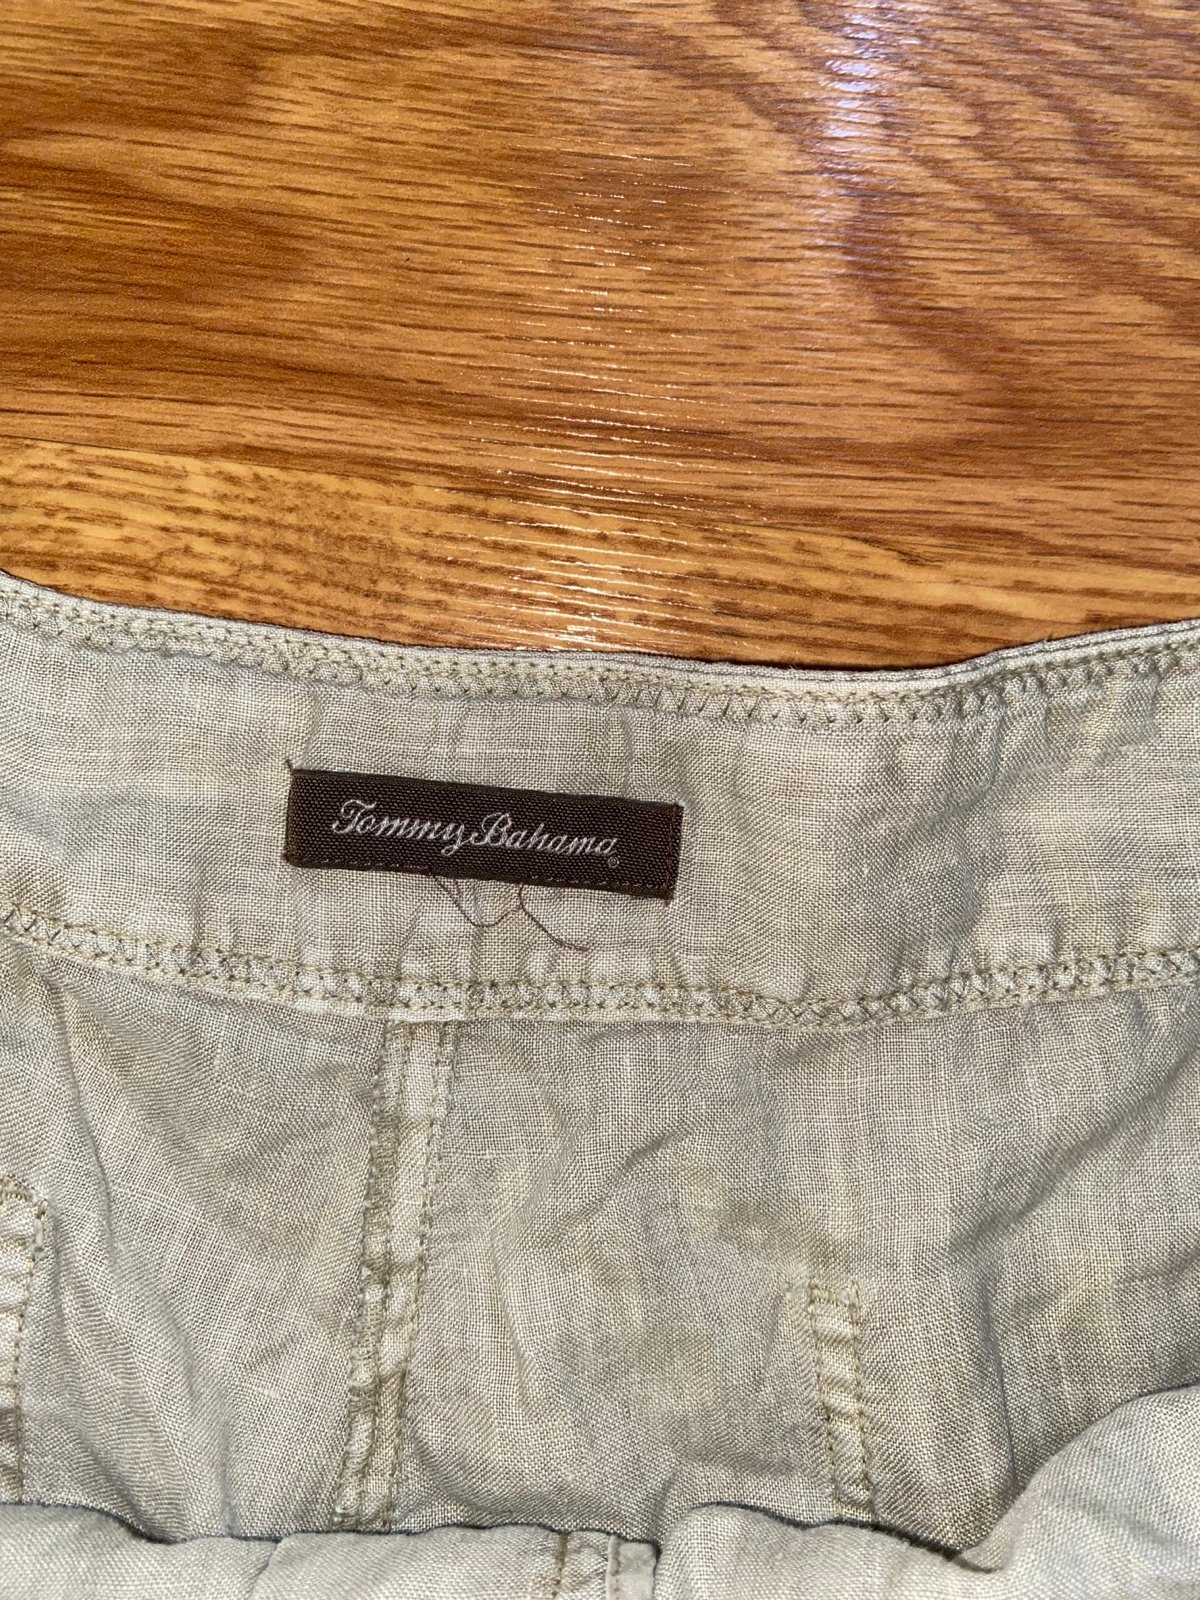 cheapest place to buy  Tommy Bahama Linen Pants kEdTdV01g Outlet Store